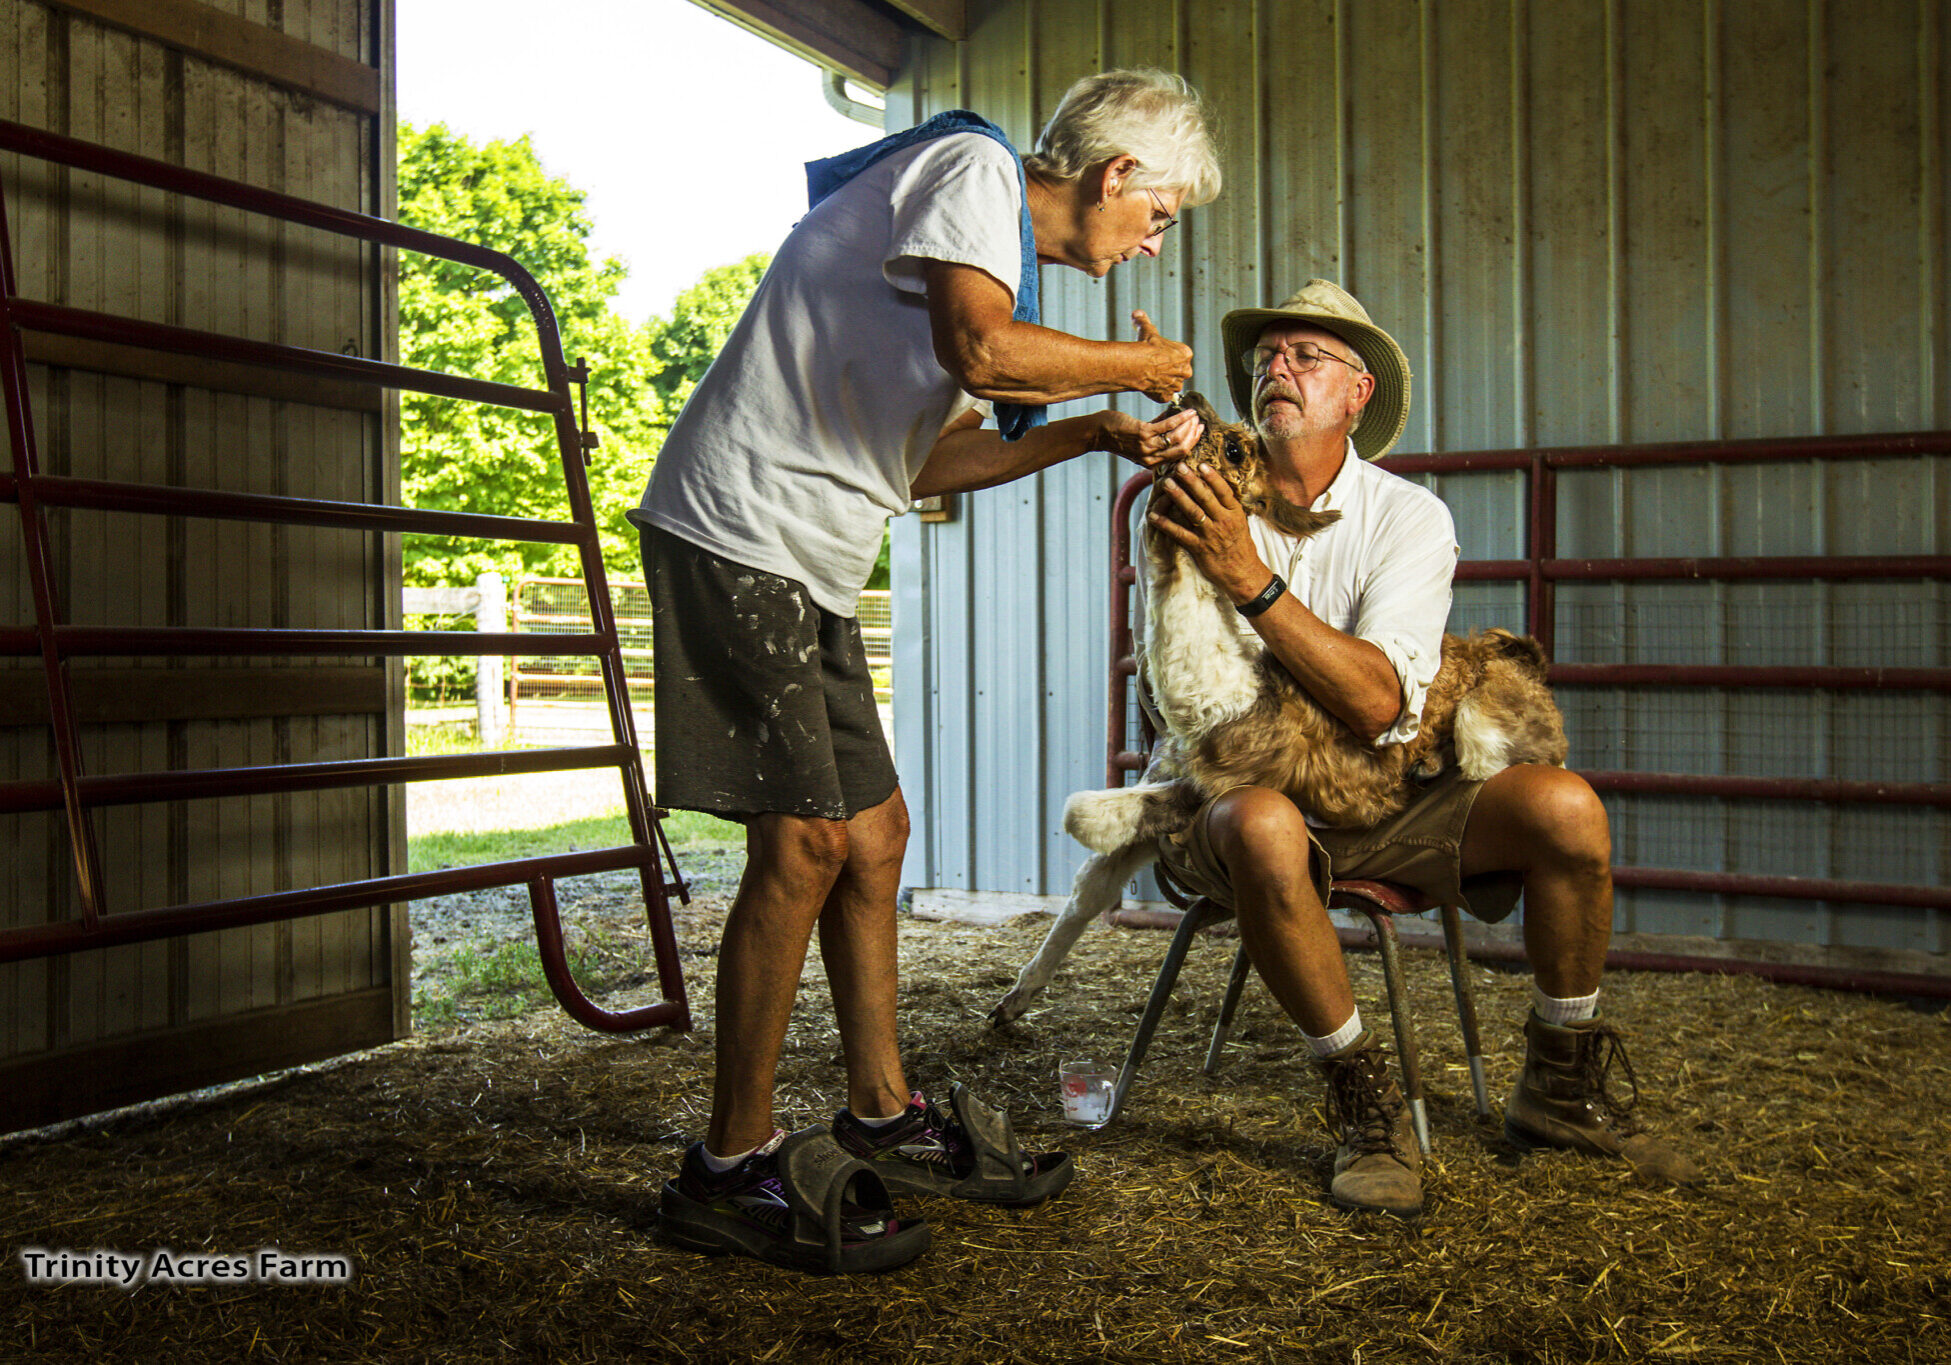 Image of two people in a barn.